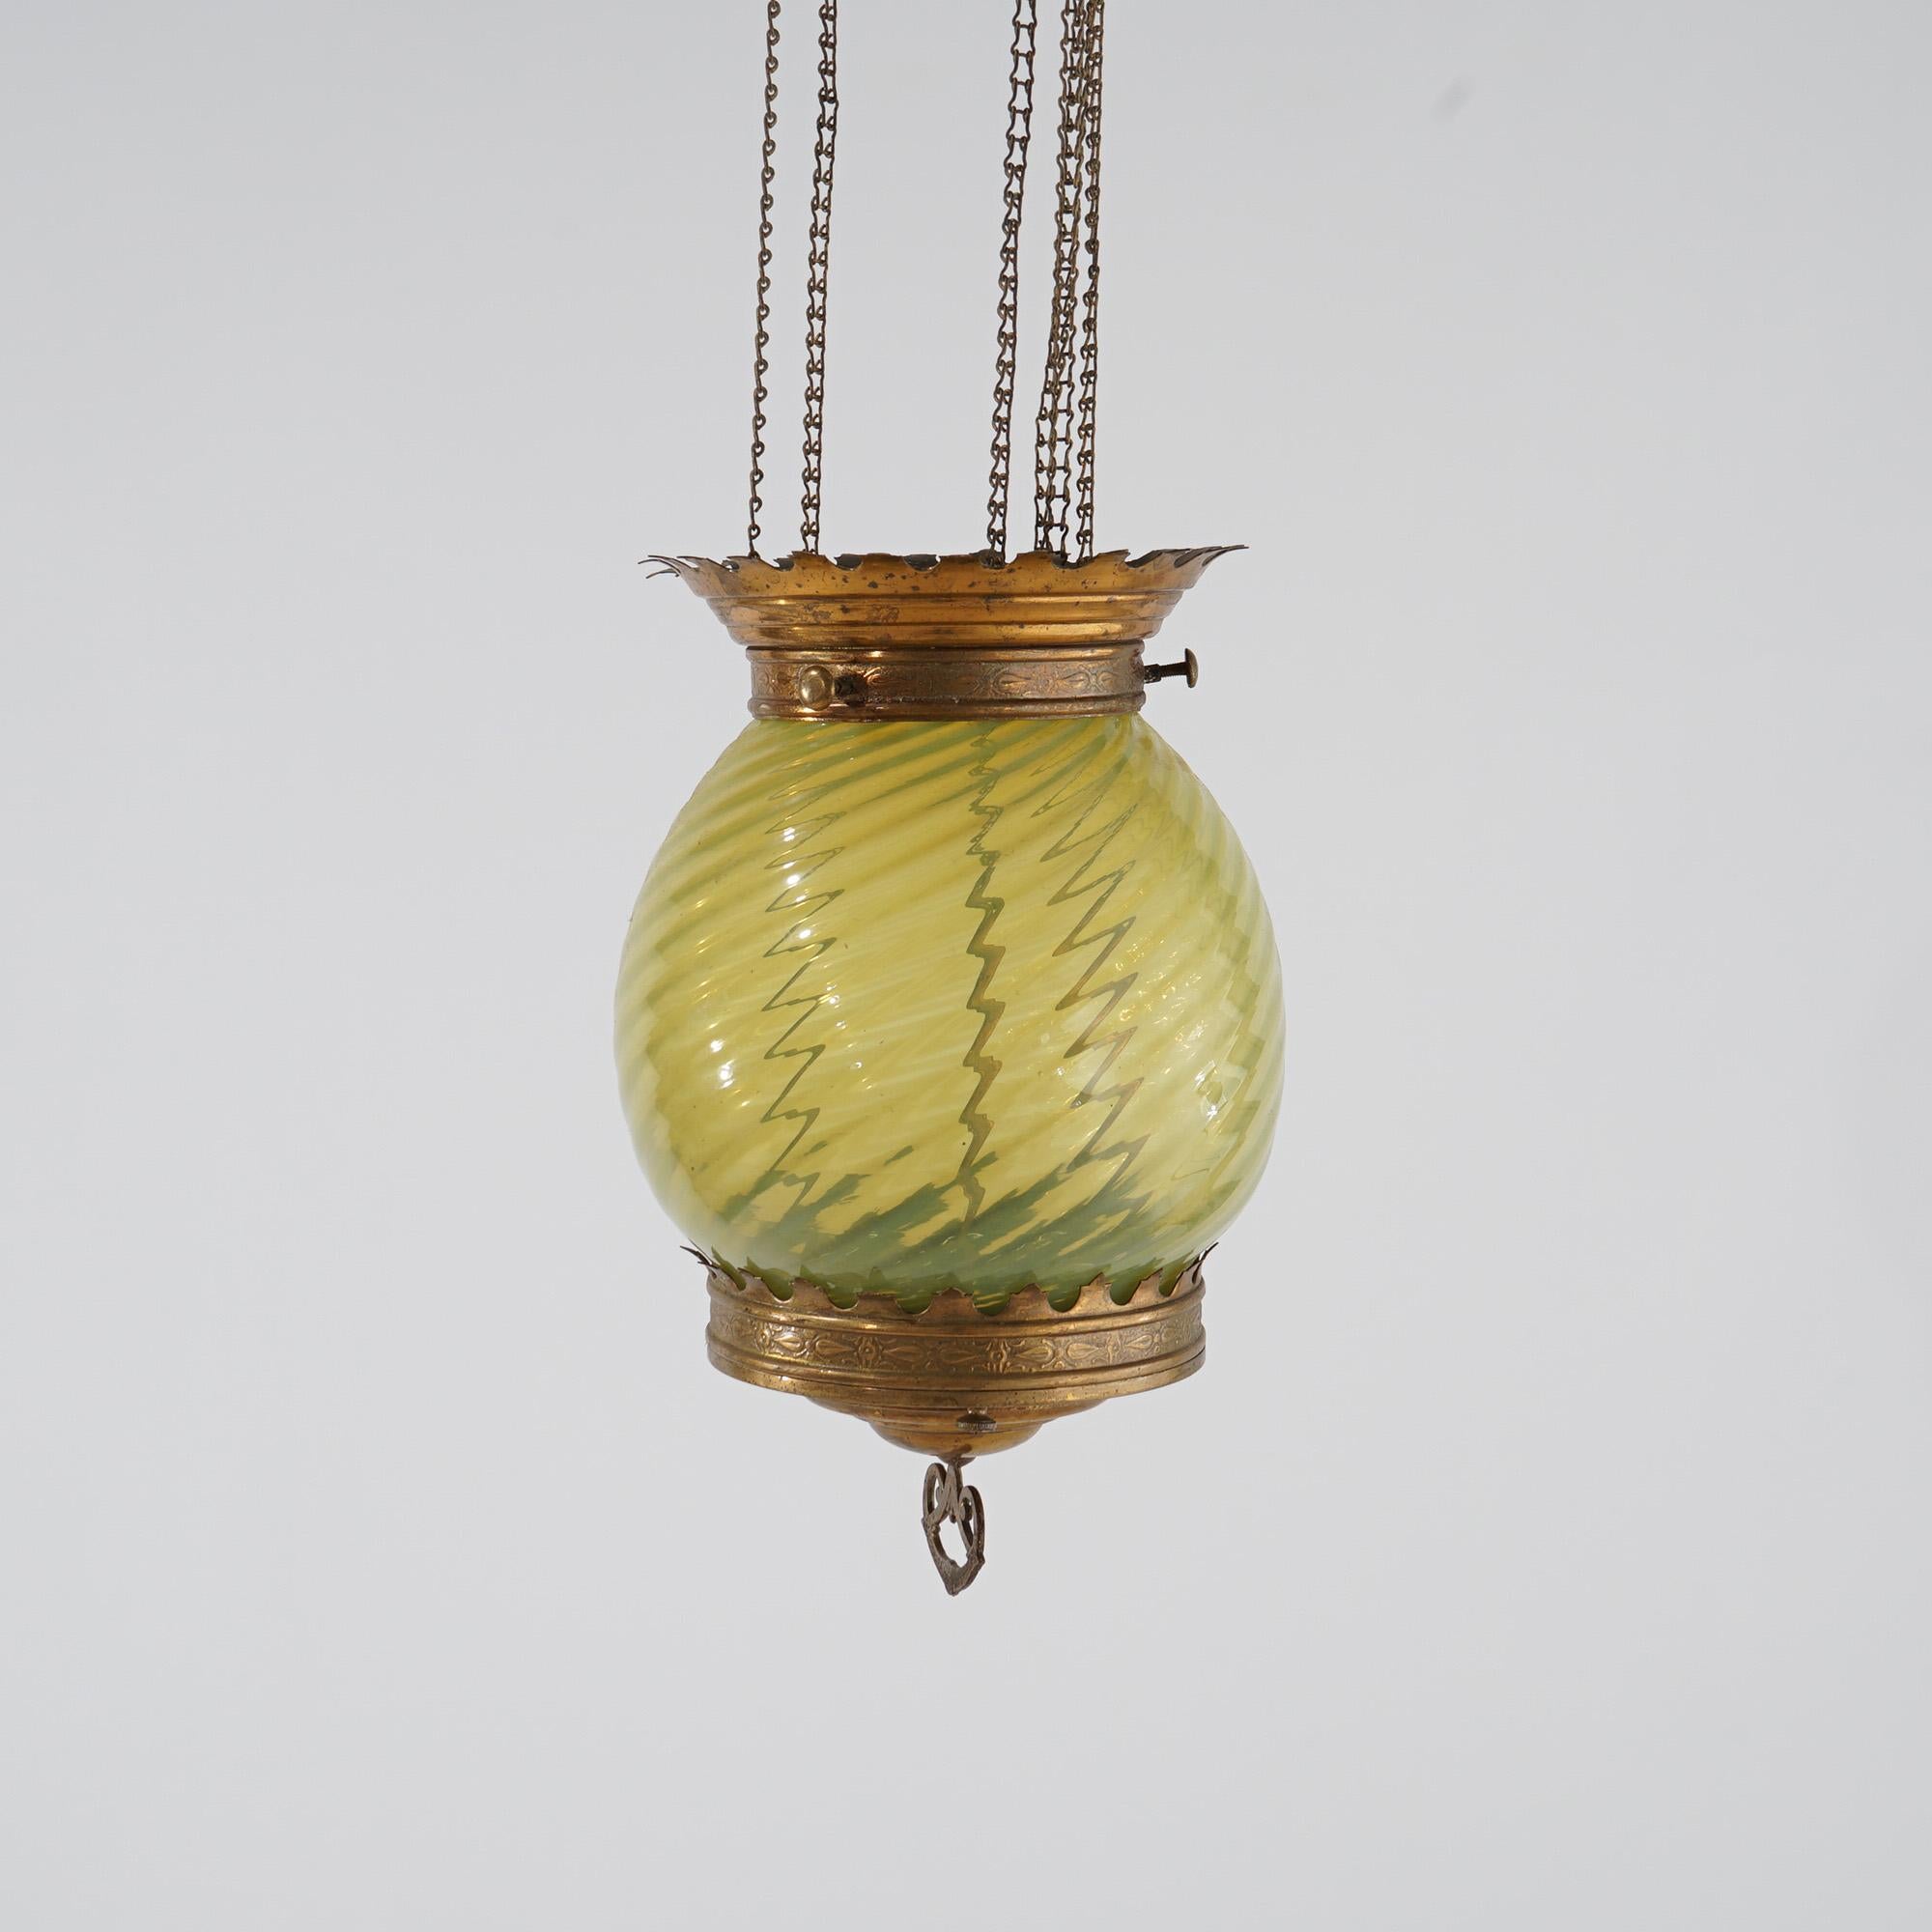 American Antique Victorian Opalescent Vaseline Glass & Brass Hanging Hall Lamp Circa 1880 For Sale